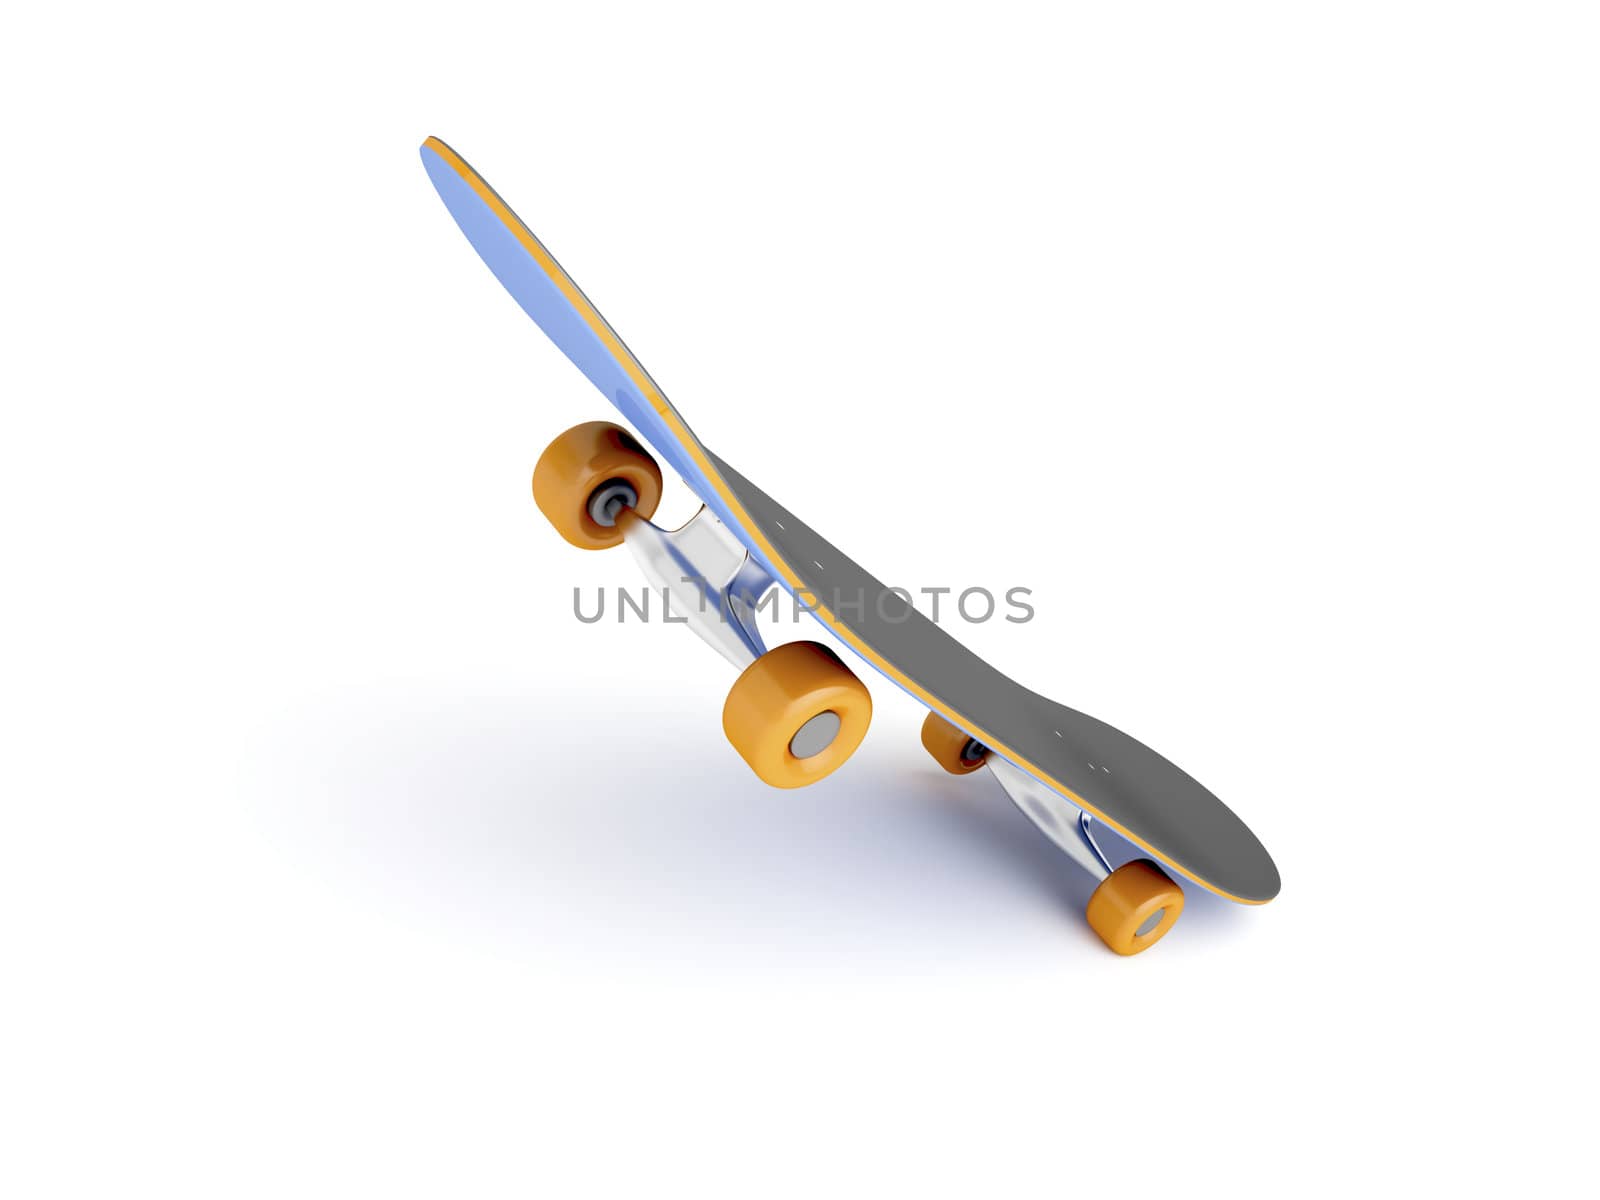 Skateboard by magraphics